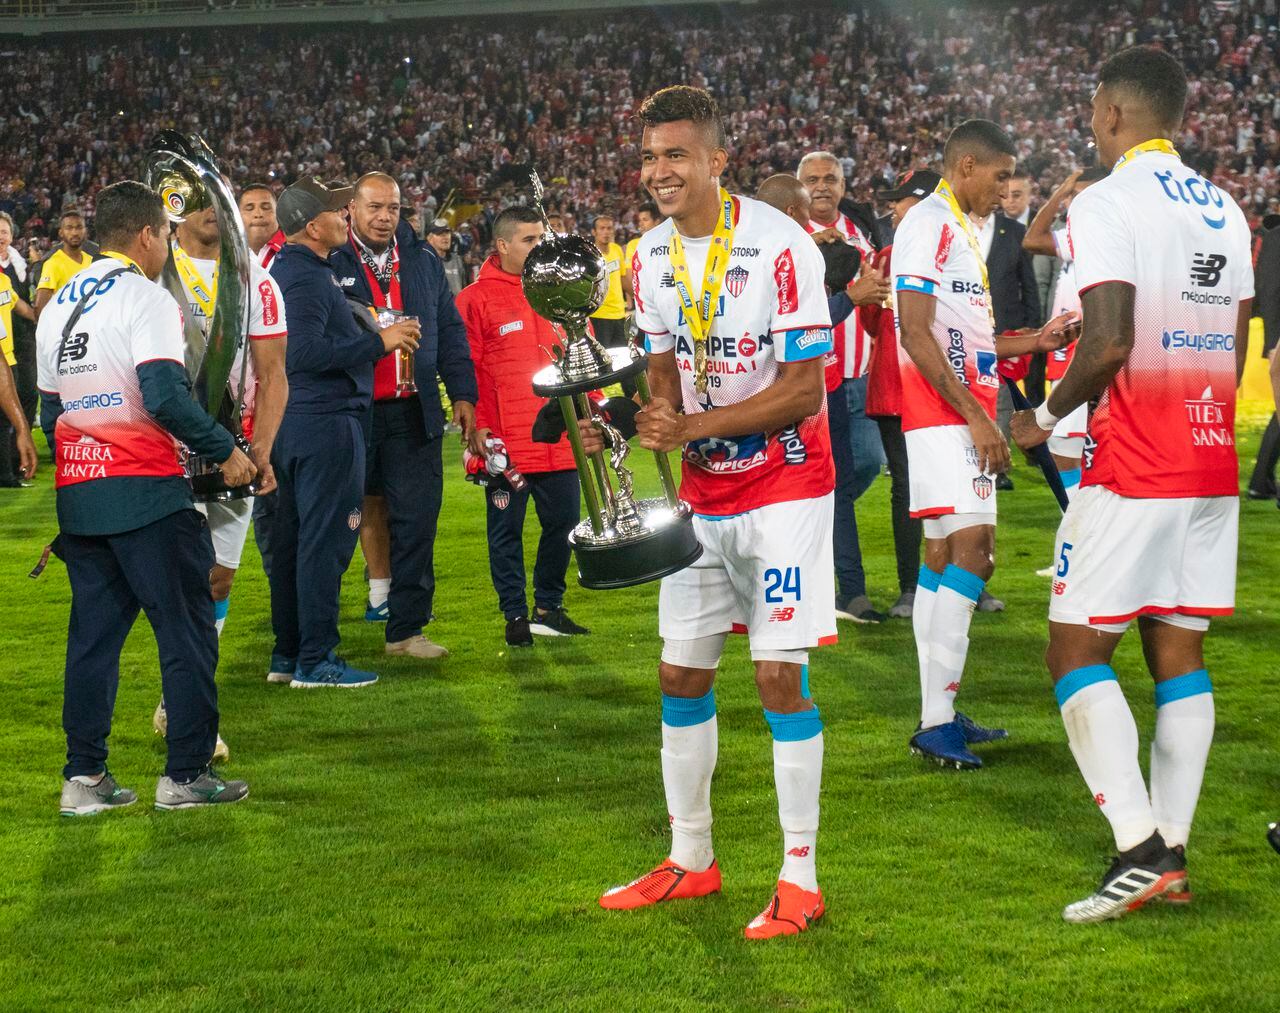 Víctor Cantillo of Atletico Junior celebrates winning the Torneo Apertura Liga Aguila 2019 championship in the penalty shootout after a second leg match between Deportivo Pasto and Atletico Junior 2019 at Estadio El Campin on June 12, 2019 in Bogota, Colombia.  (Photo by Daniel Garzon Herazo/NurPhoto via Getty Images)